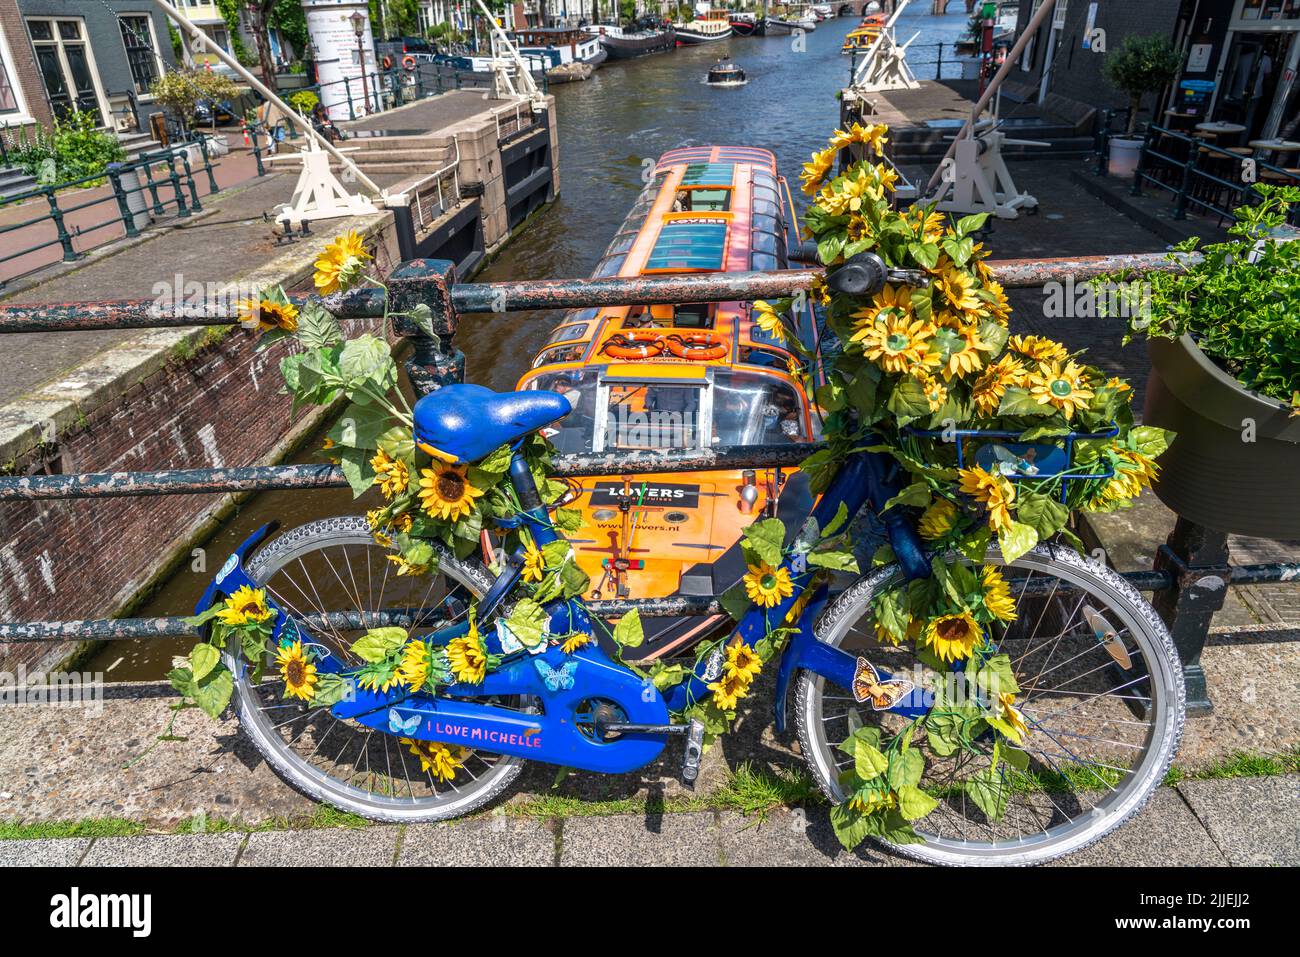 Sint Antoniesluis, on the Oudeschans canal, bicycle decorated with sunflowers, canal cruise boat, café, De Sluyswacht, Amsterdam, Netherlands Stock Photo